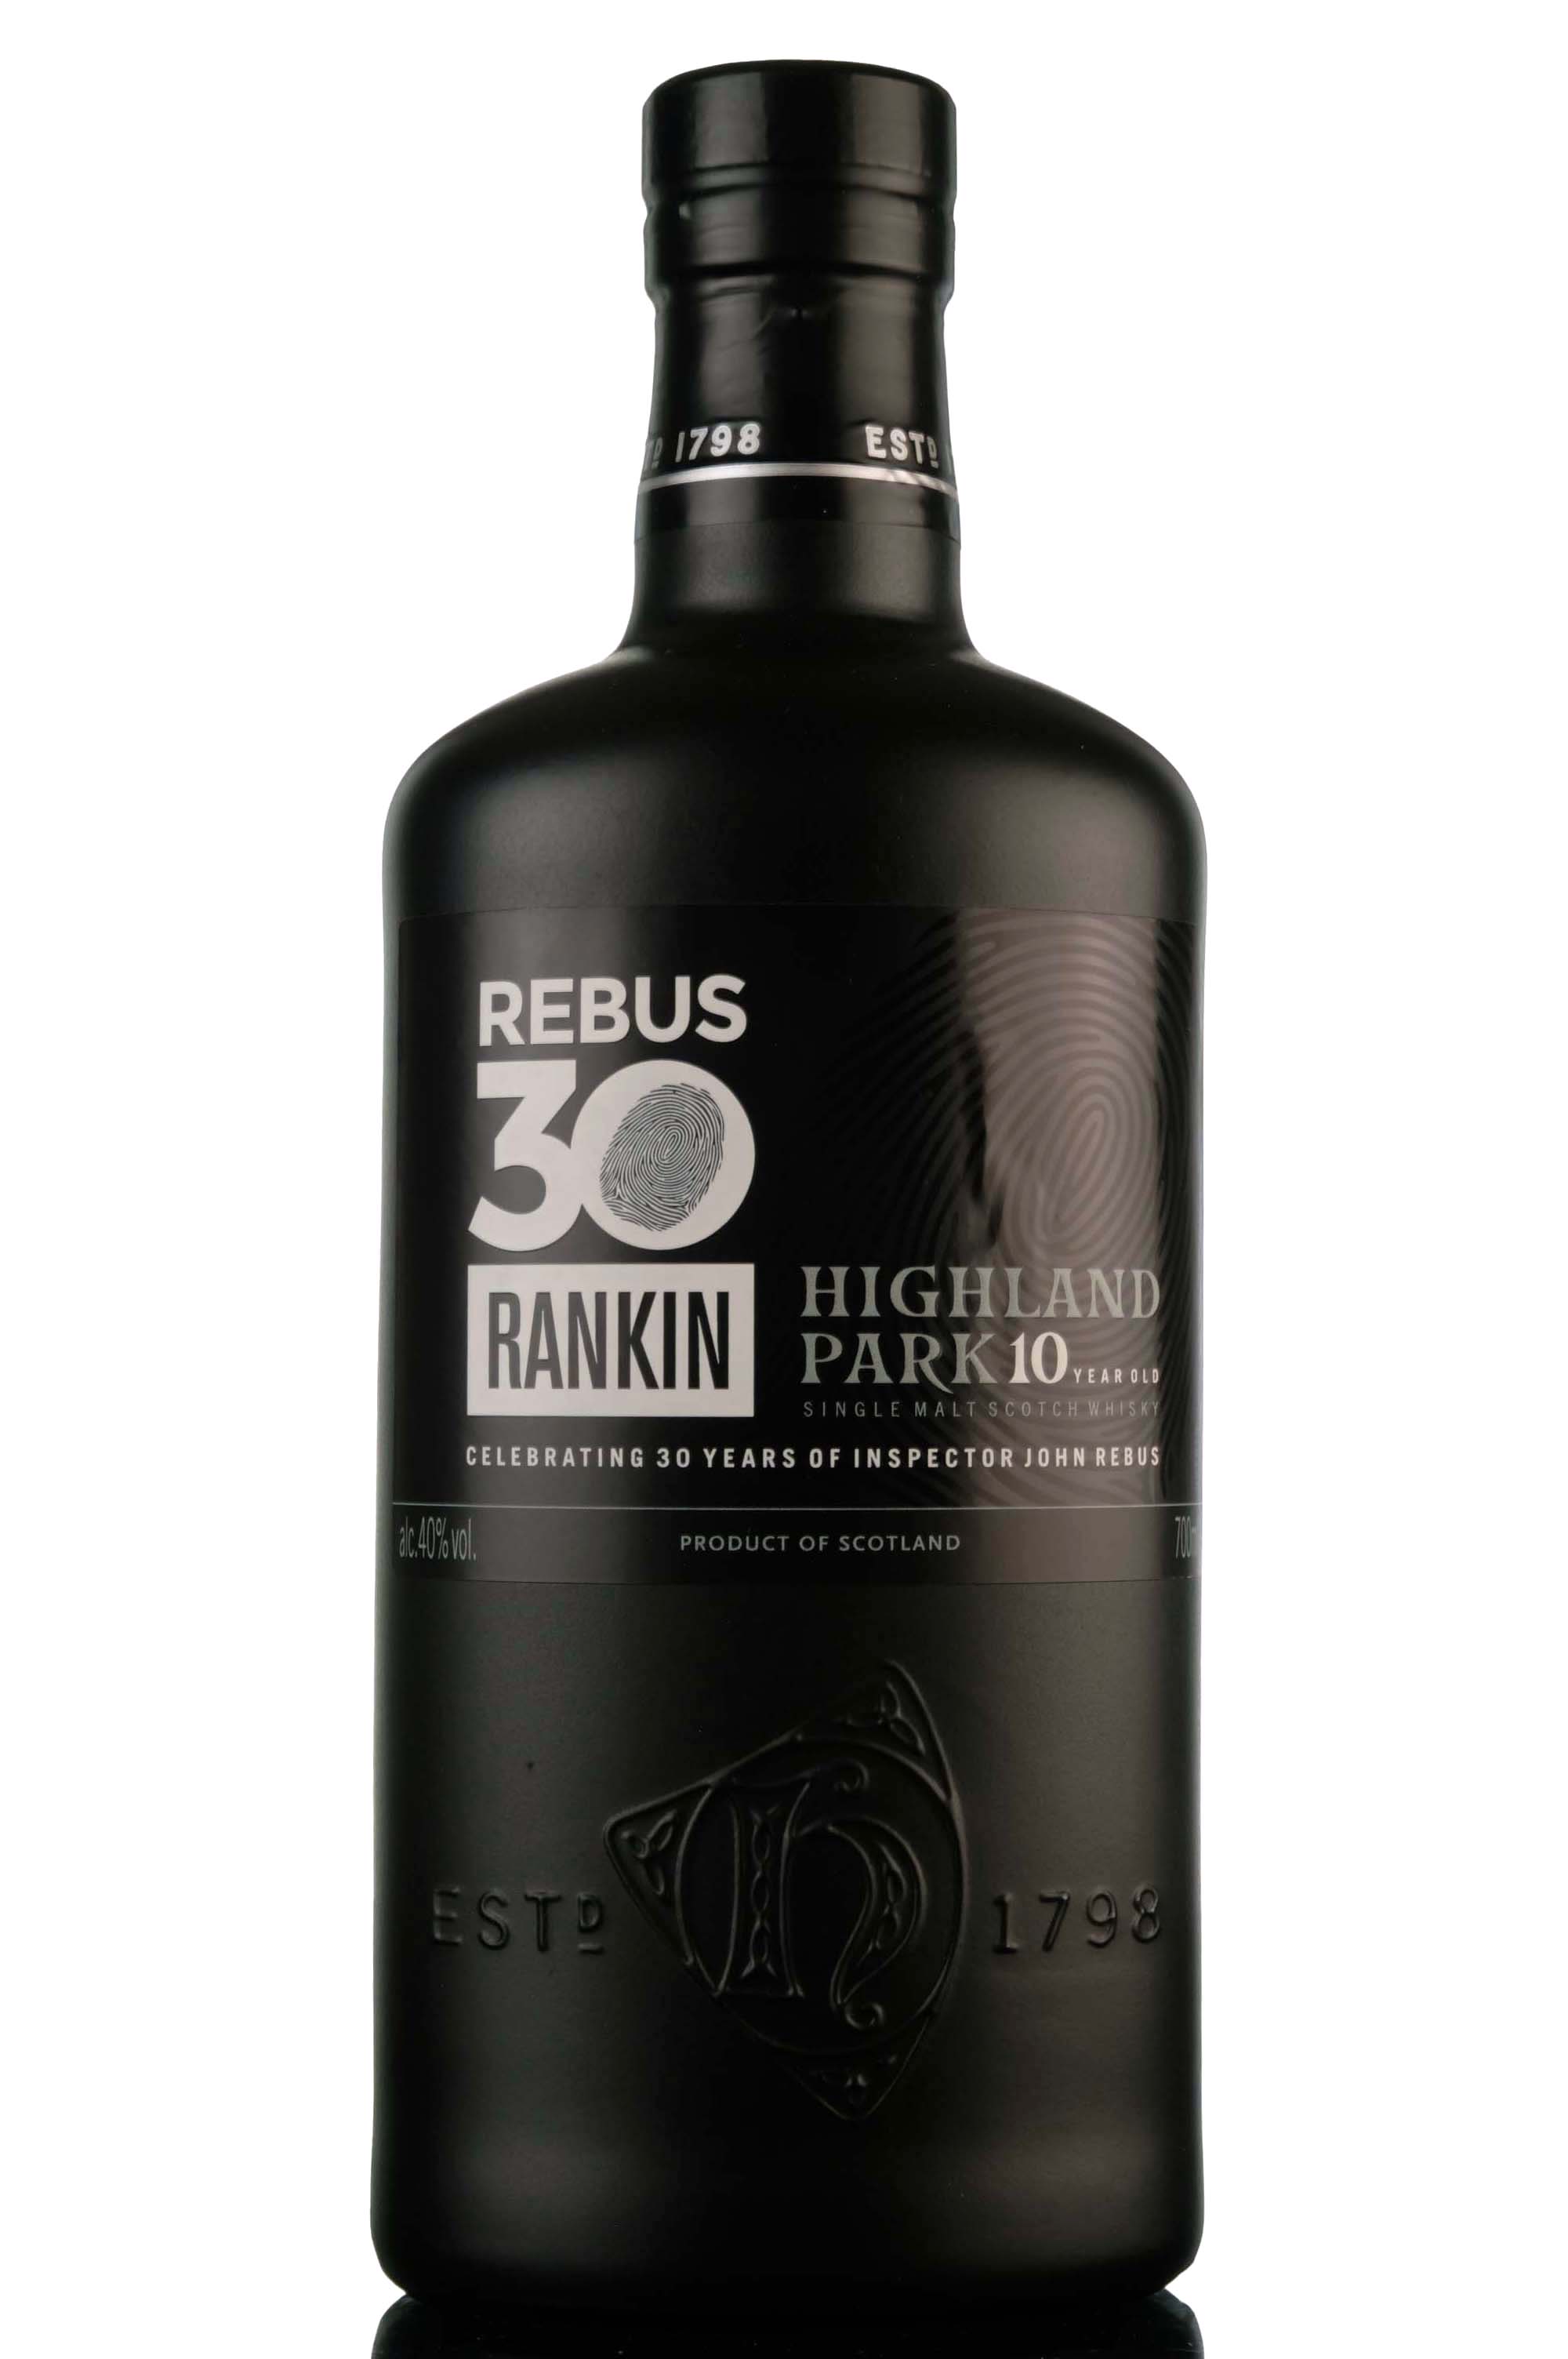 Highland Park 10 Year Old - Rebus 30 - 2017 Release